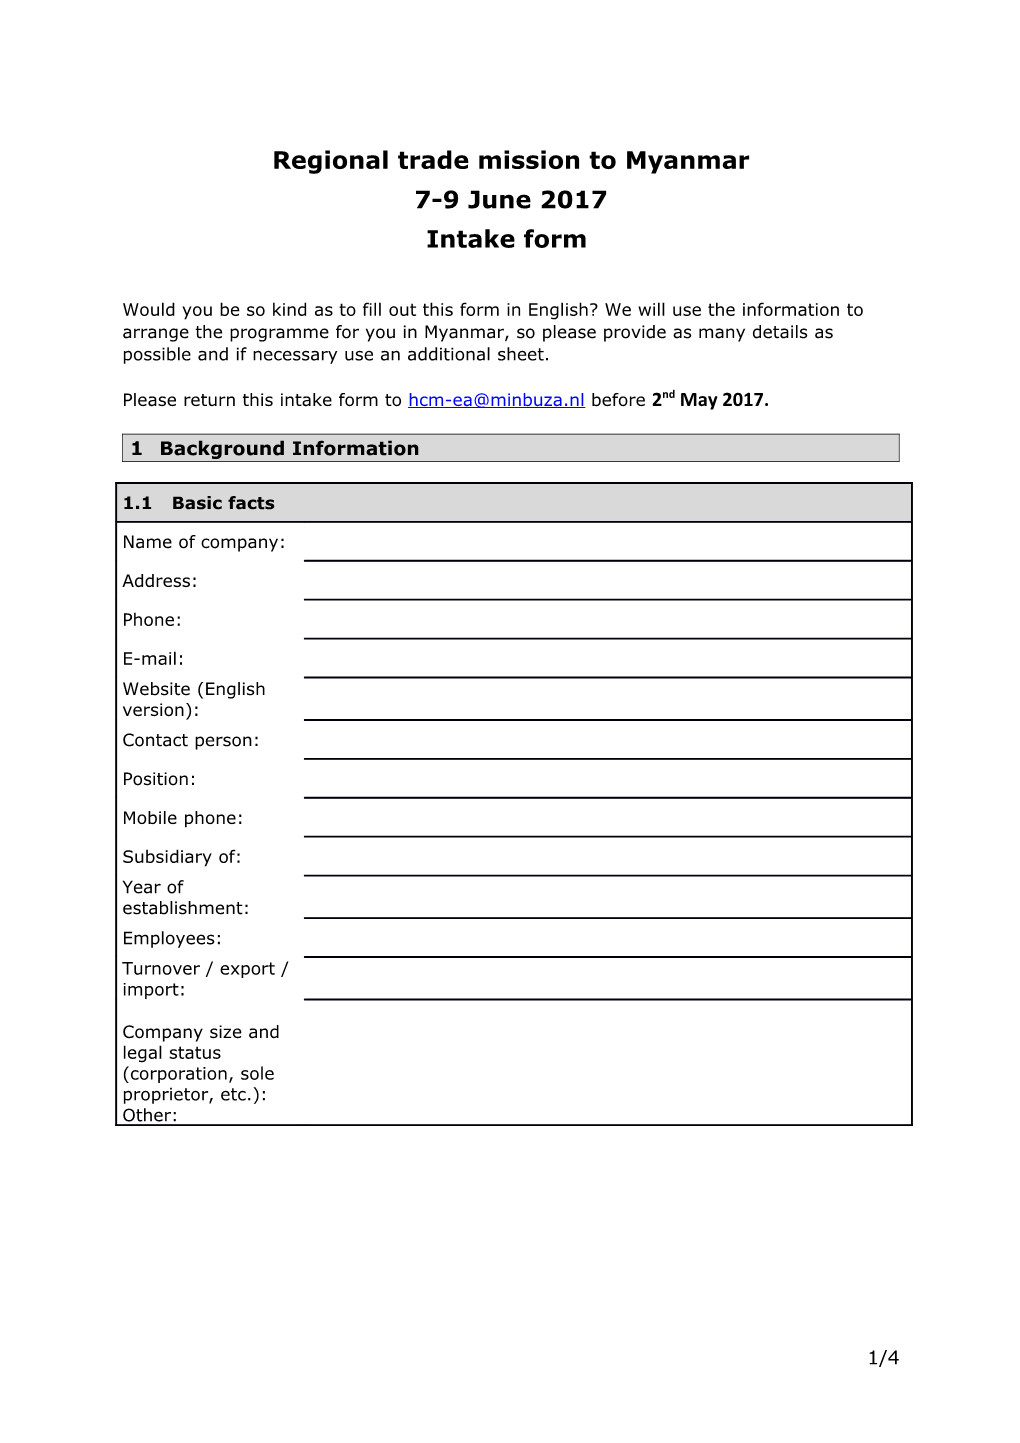 If You Have Any Questions When Completing This Form, Please Email Dirk Jan Wierenga (Dj